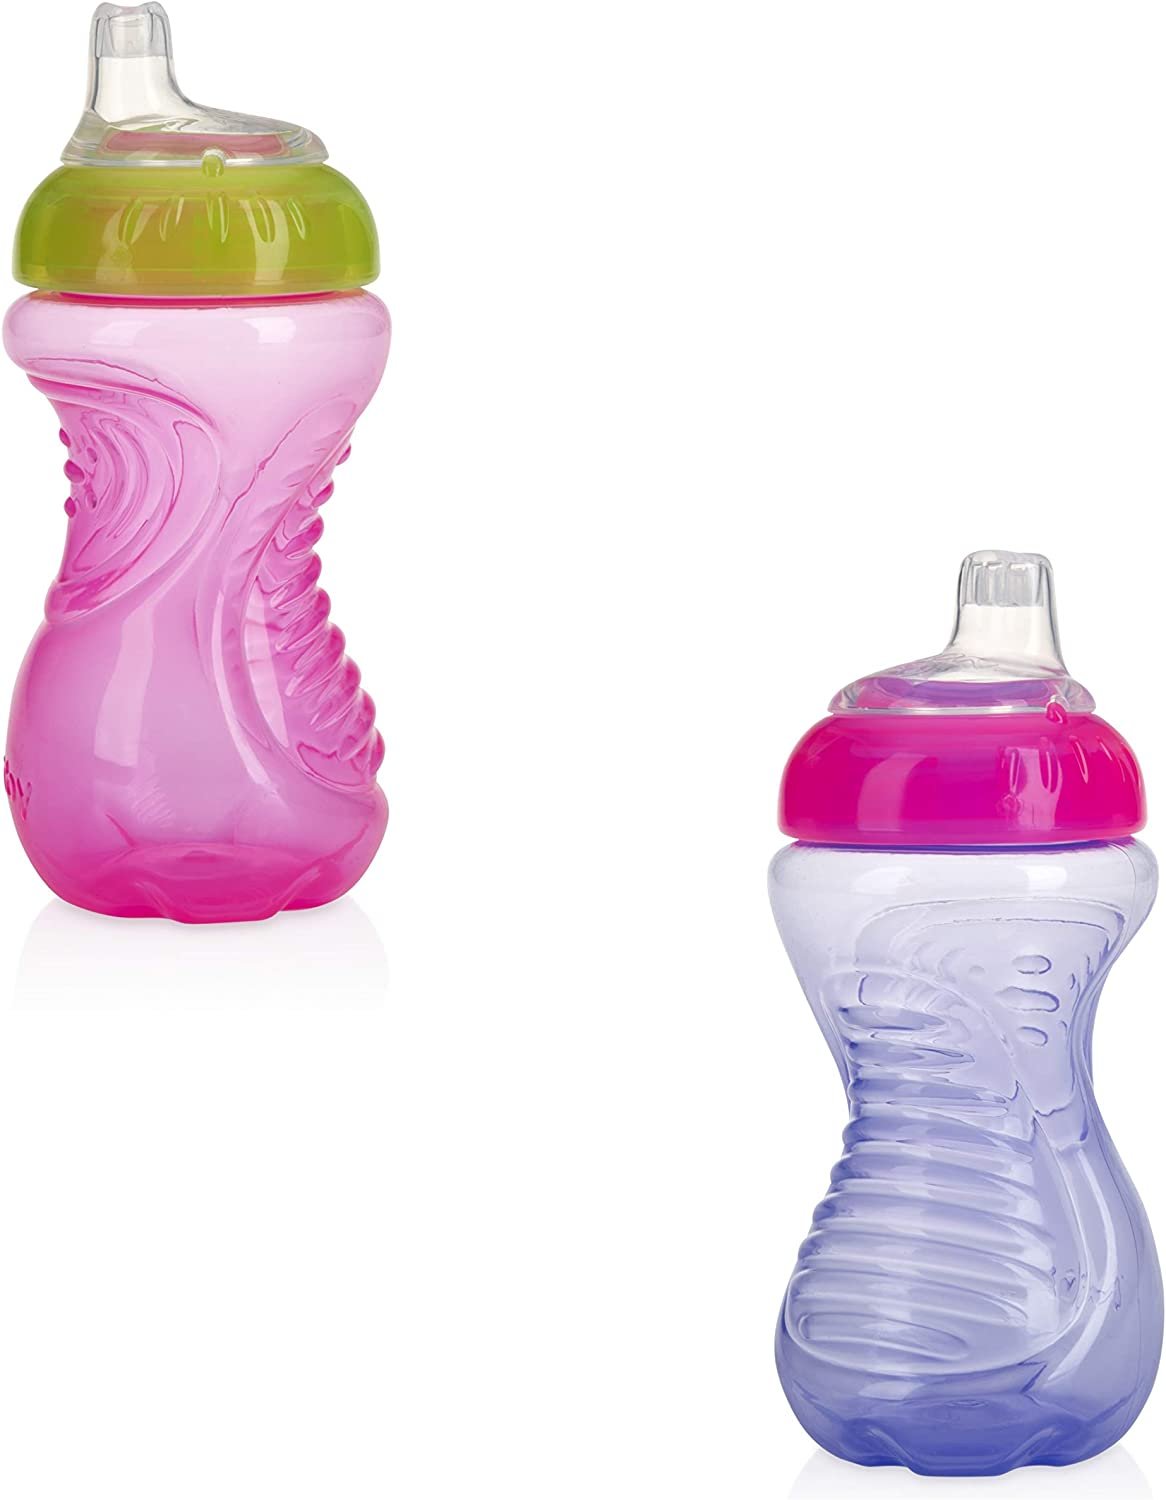 Nuby No-Spill Easy Grip Cup, 10 Ounce (Pink/Purple)